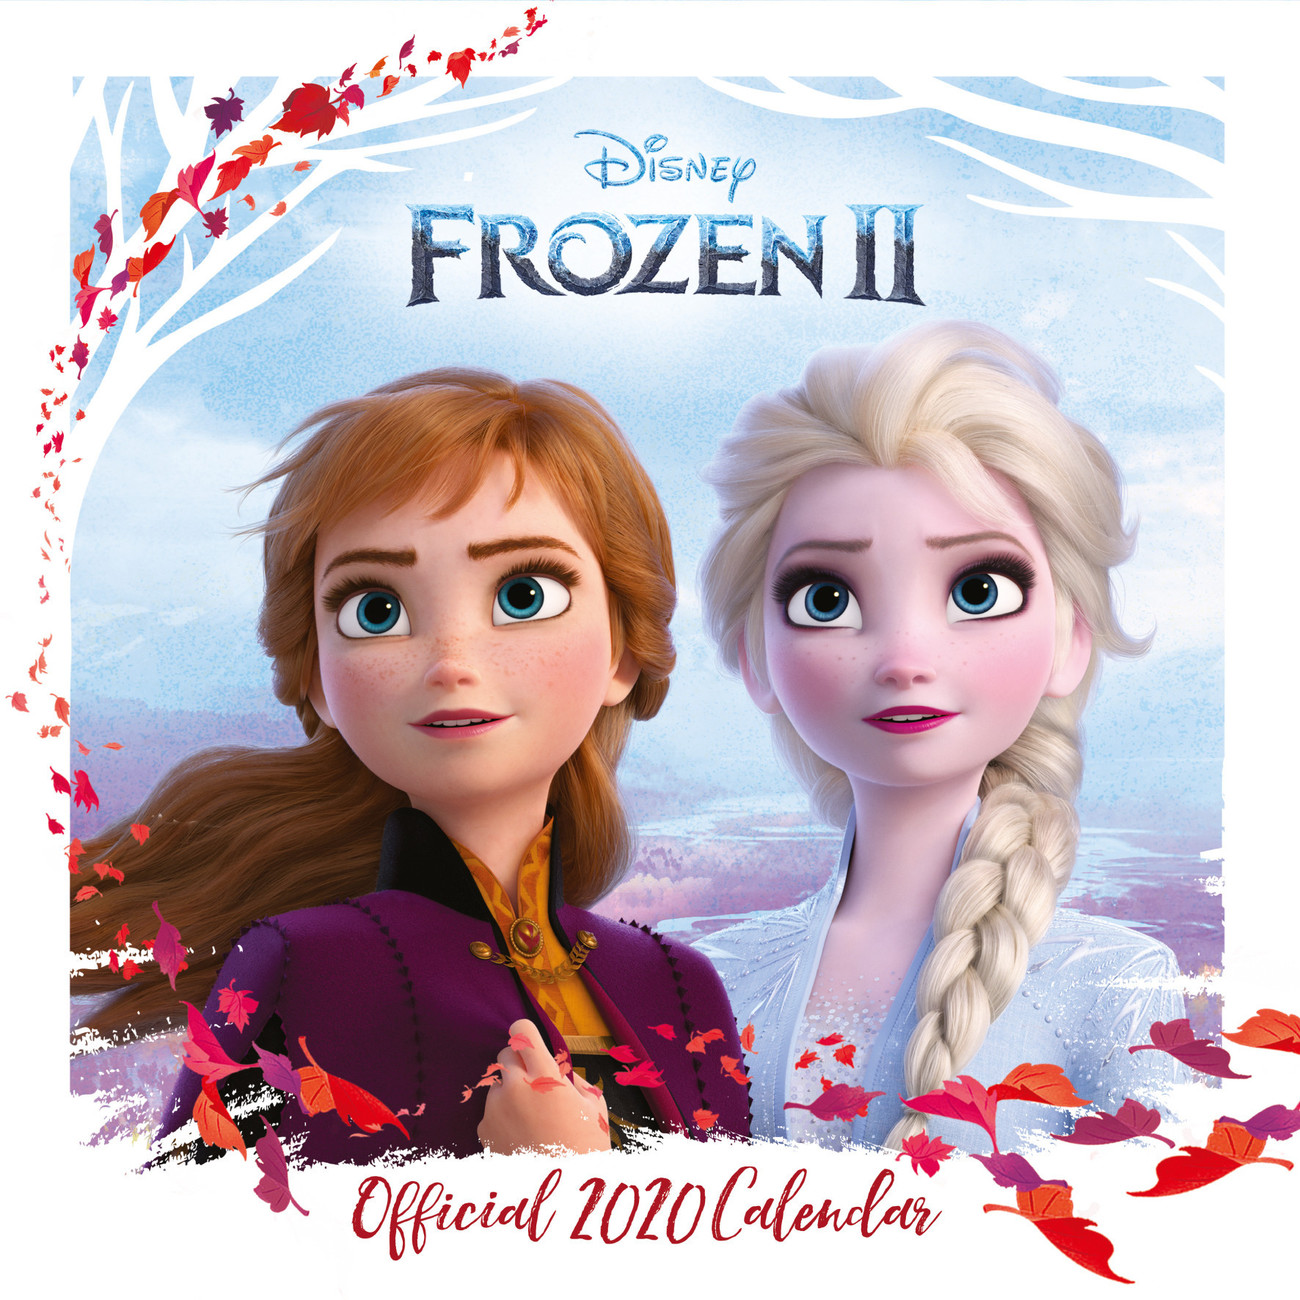 Frozen 2 Wall Calendars 2020 Buy at Europosters